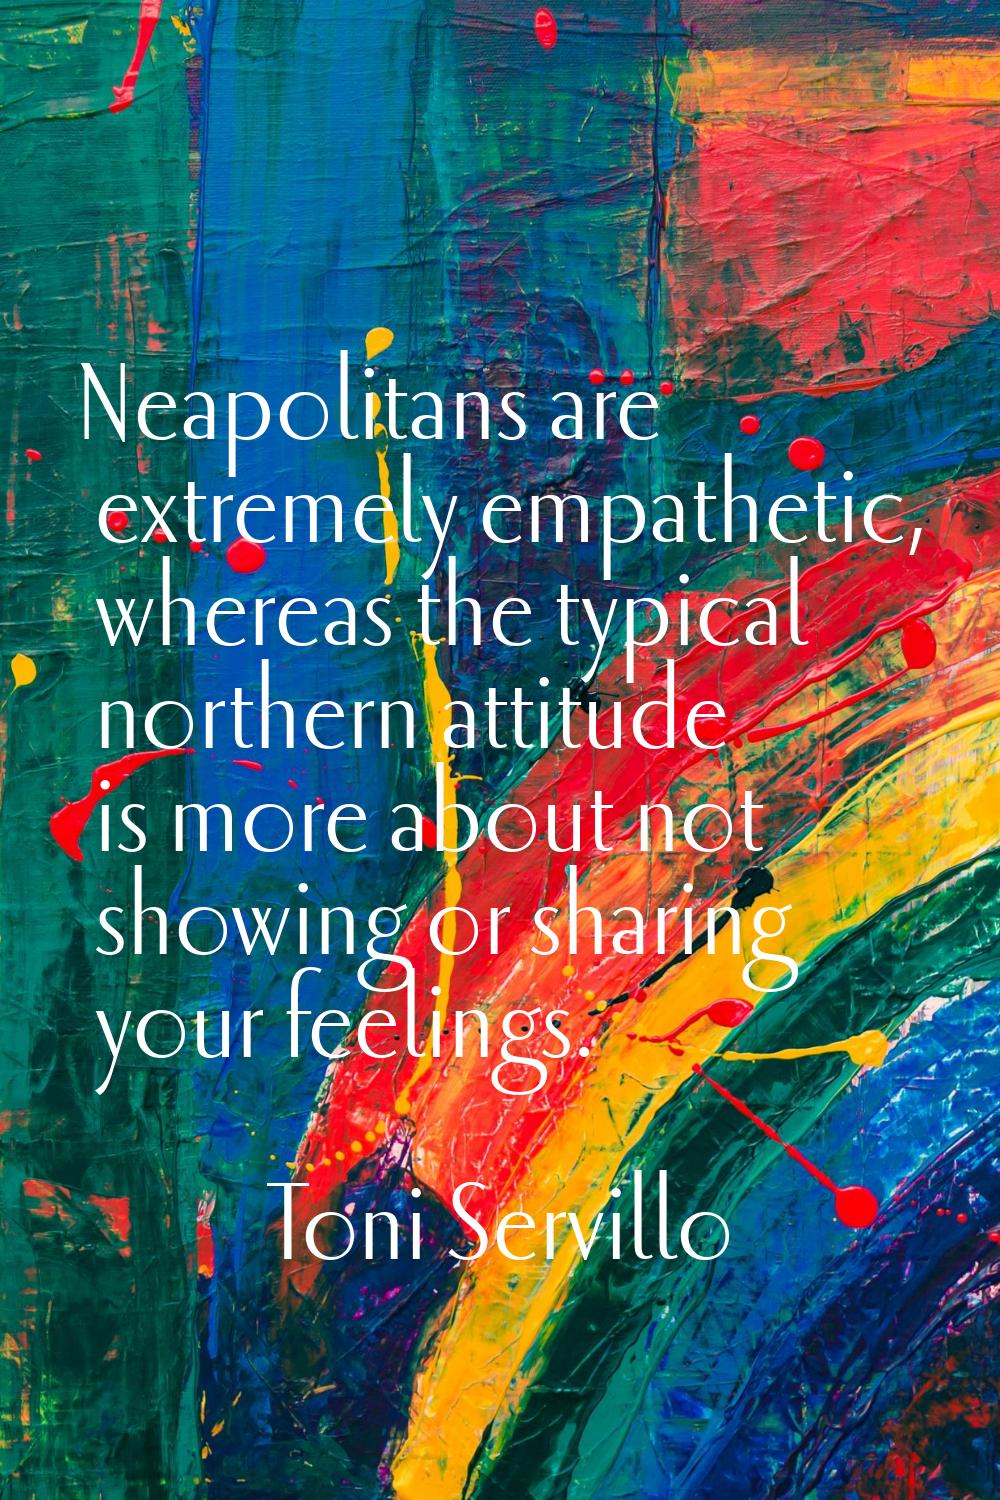 Neapolitans are extremely empathetic, whereas the typical northern attitude is more about not showi